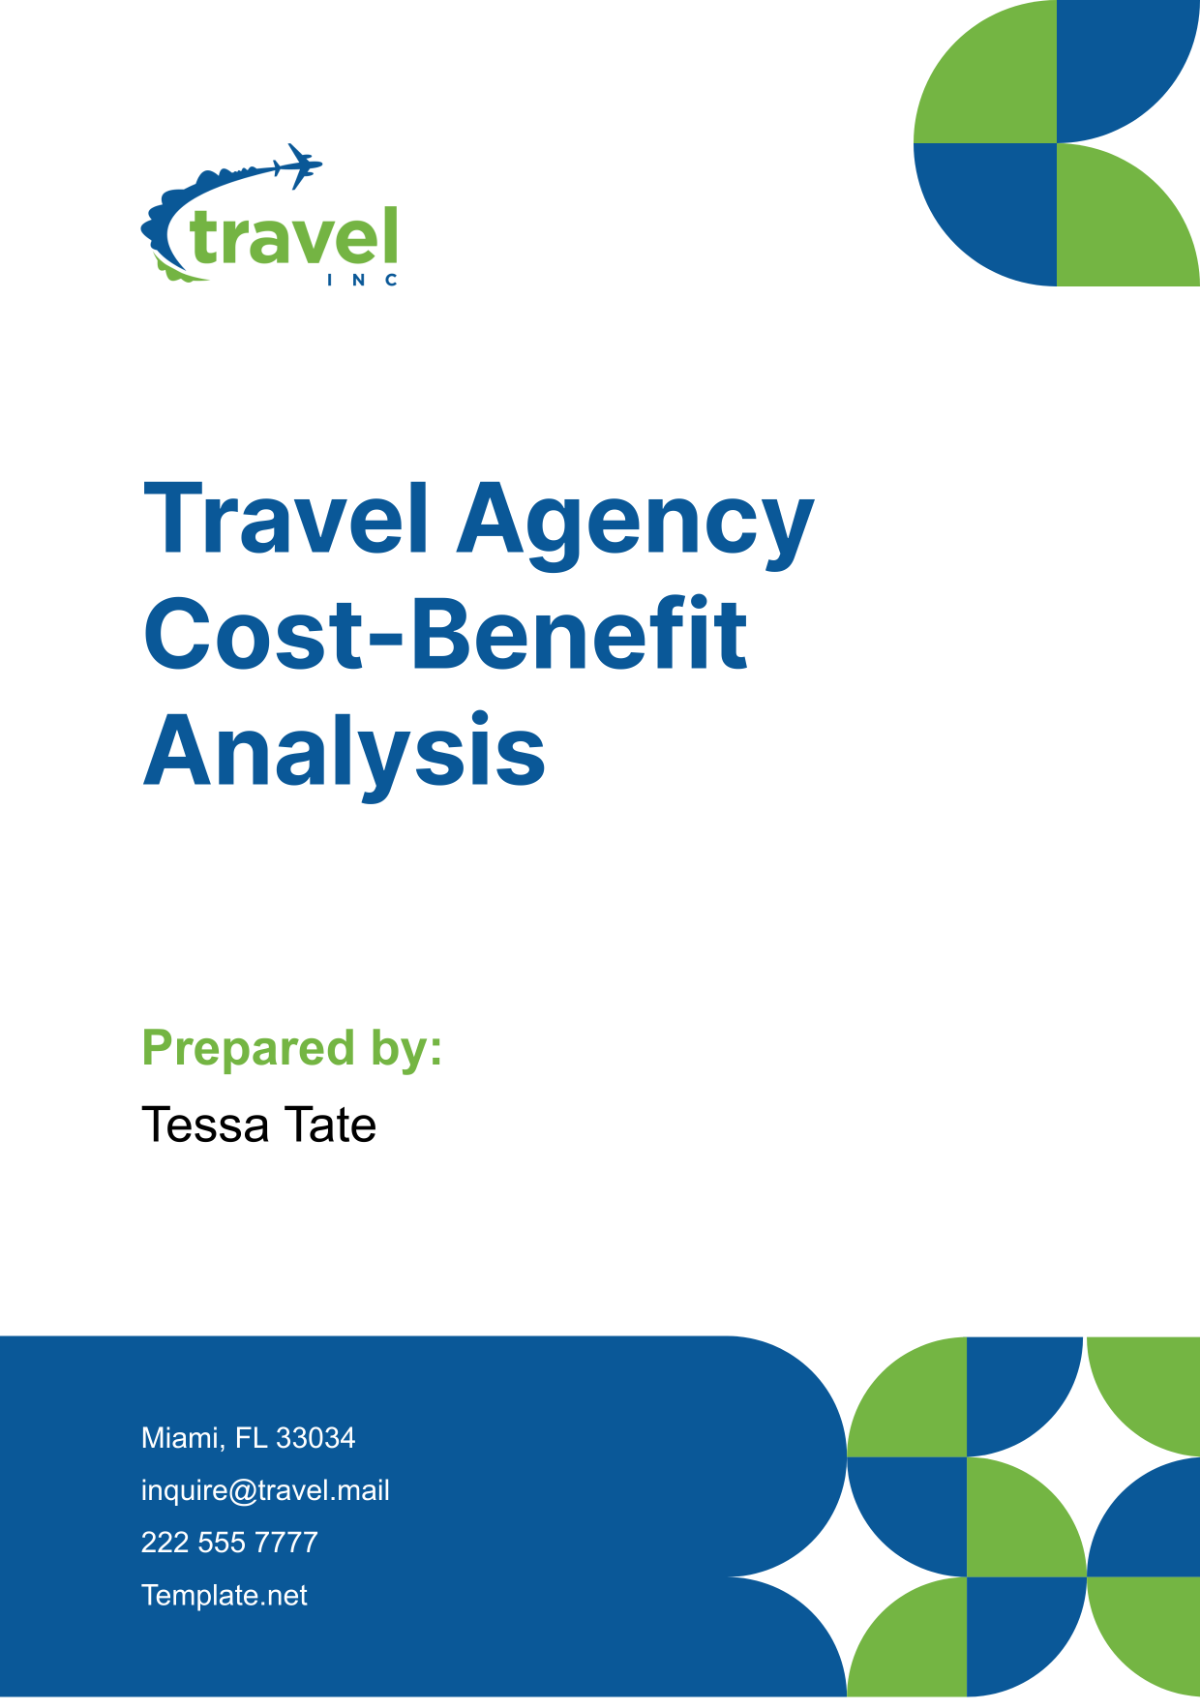 Travel Agency Cost-Benefit Analysis Template